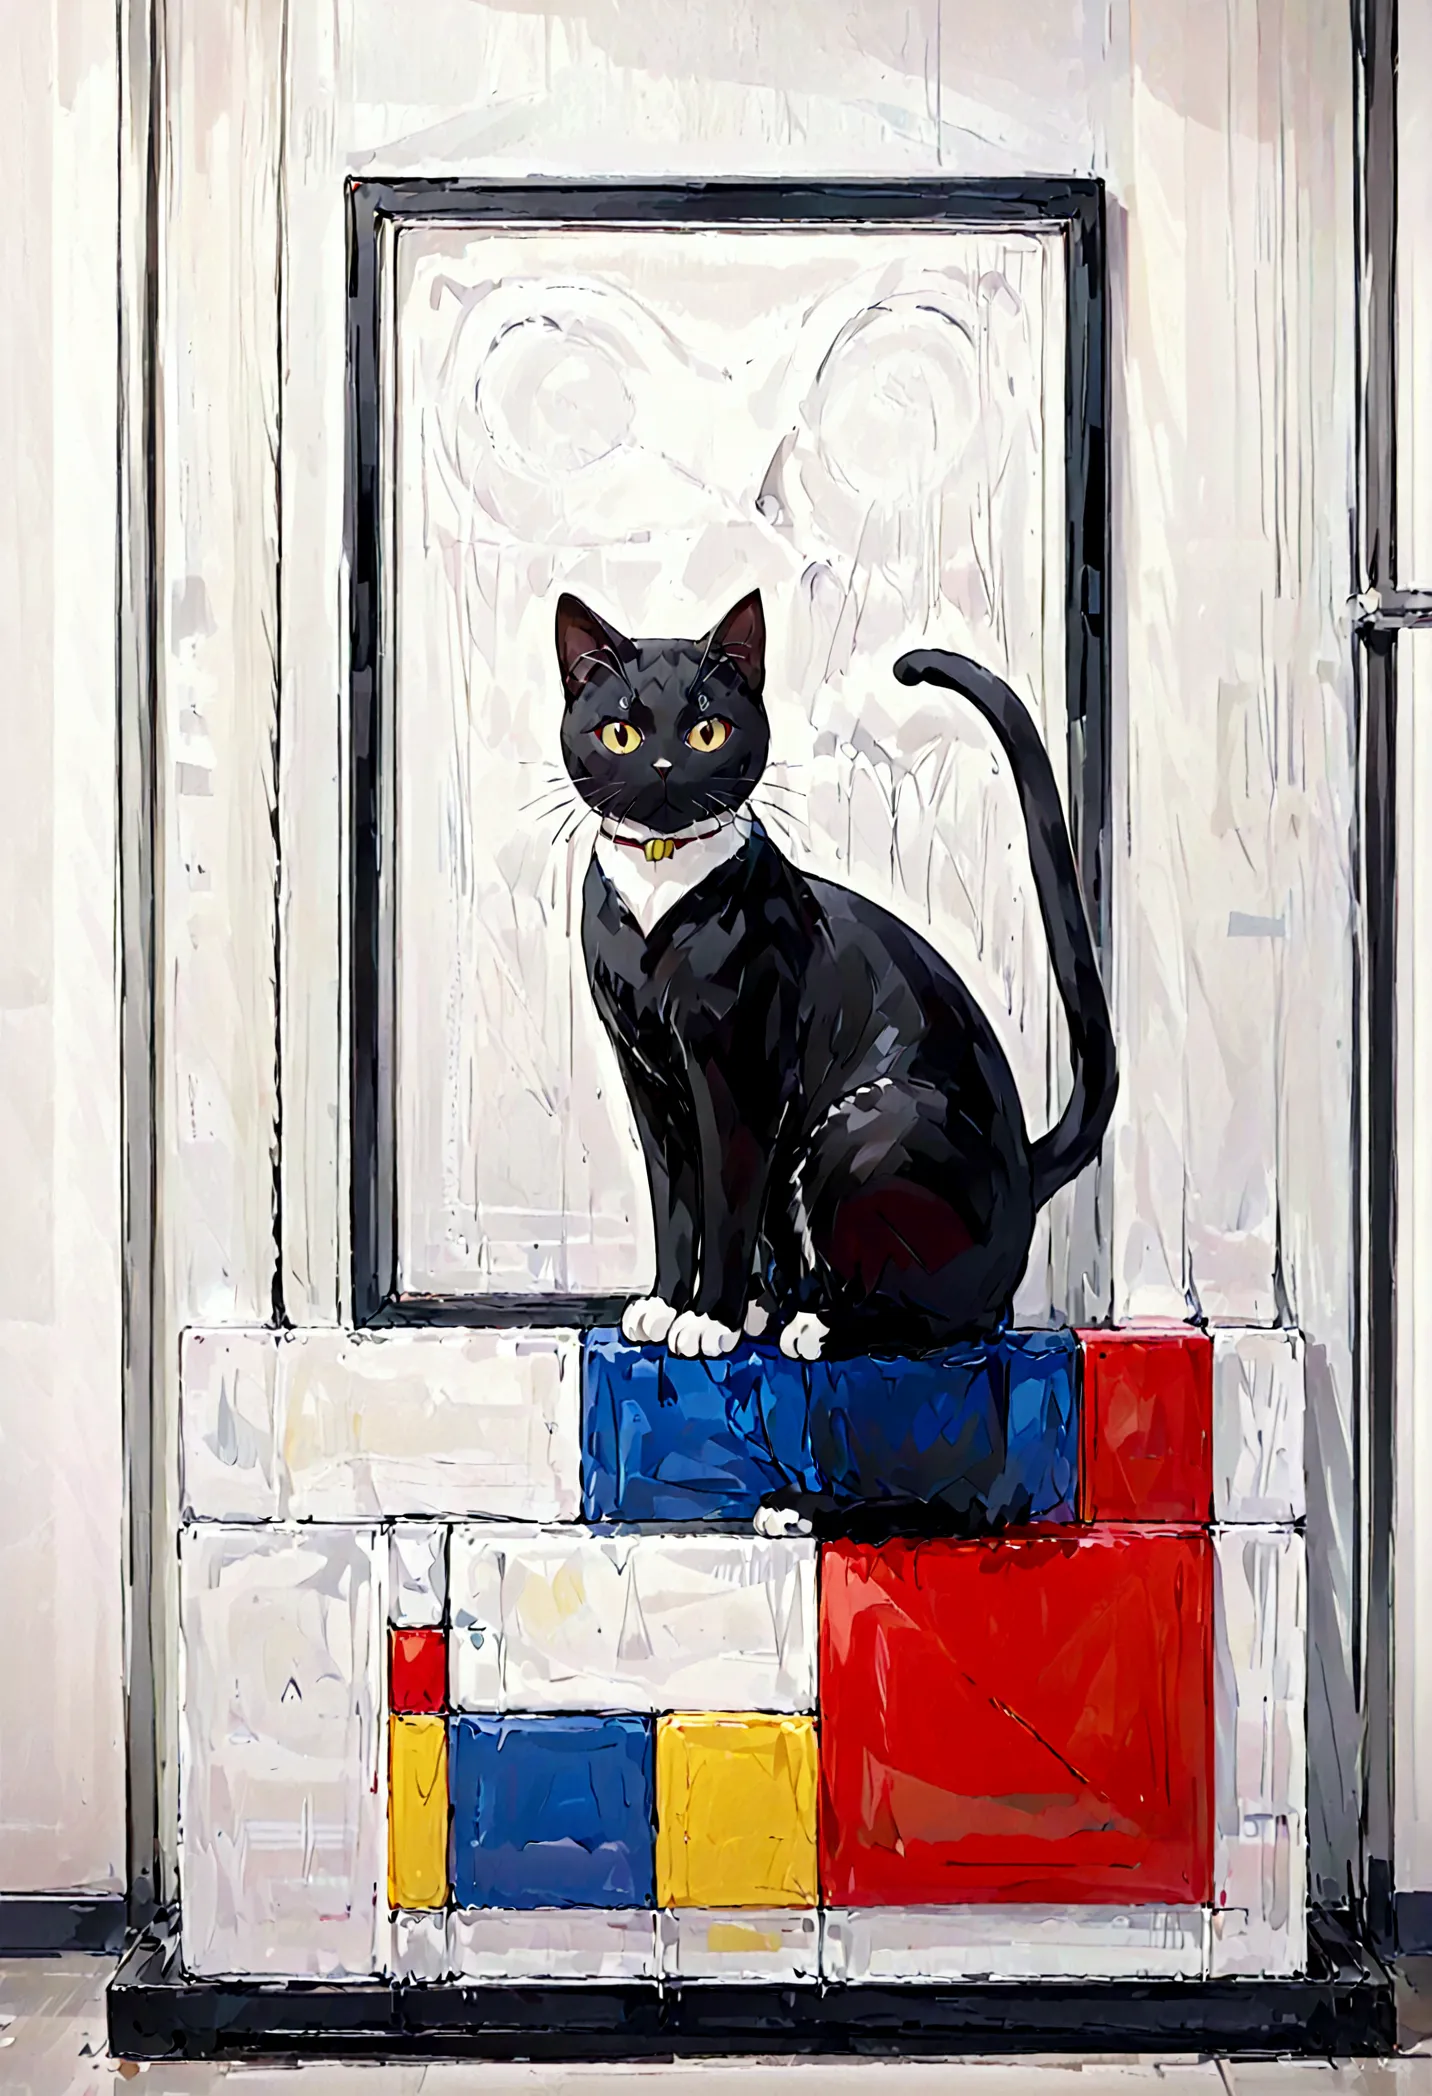 A captivating artwork by Piet Mondrian featuring a cat. The iconic Mondrian style is present, with the cat depicted in primary c...